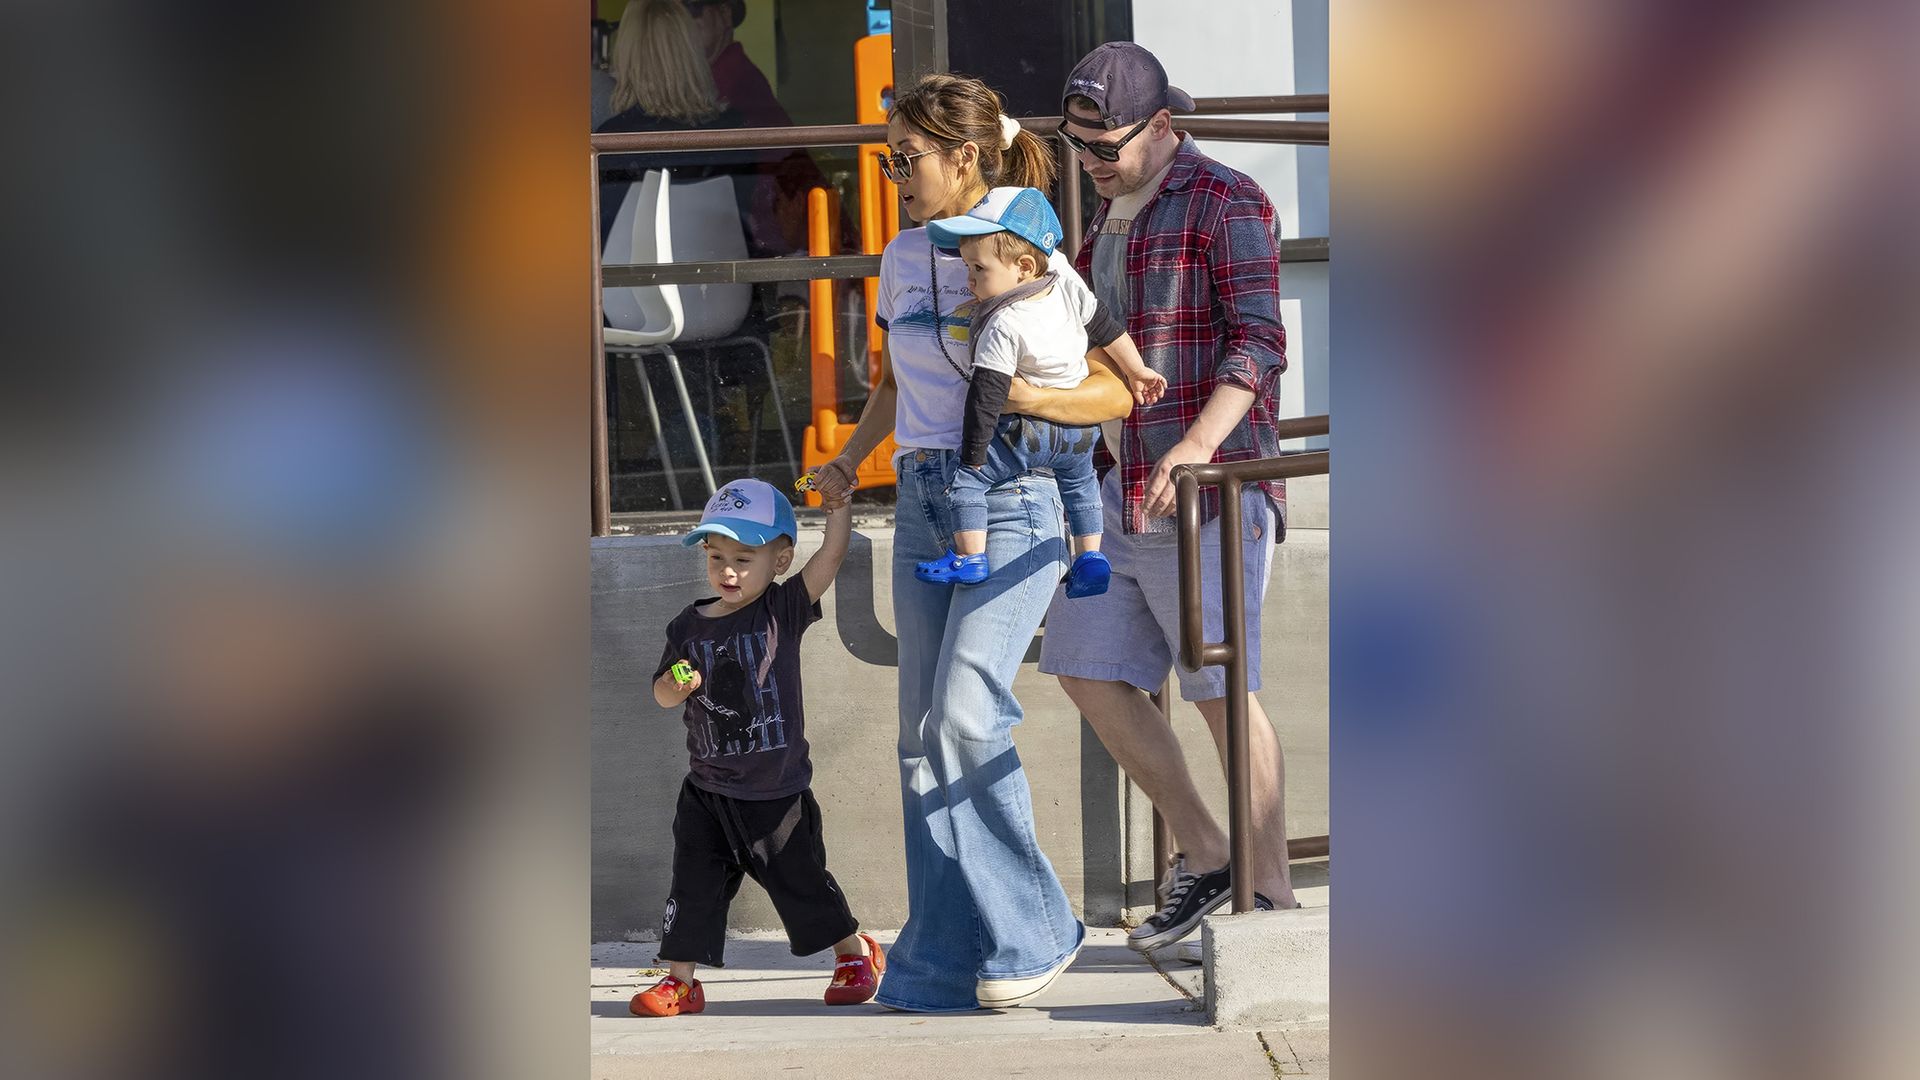 Macaulay Culkin with his wife and children